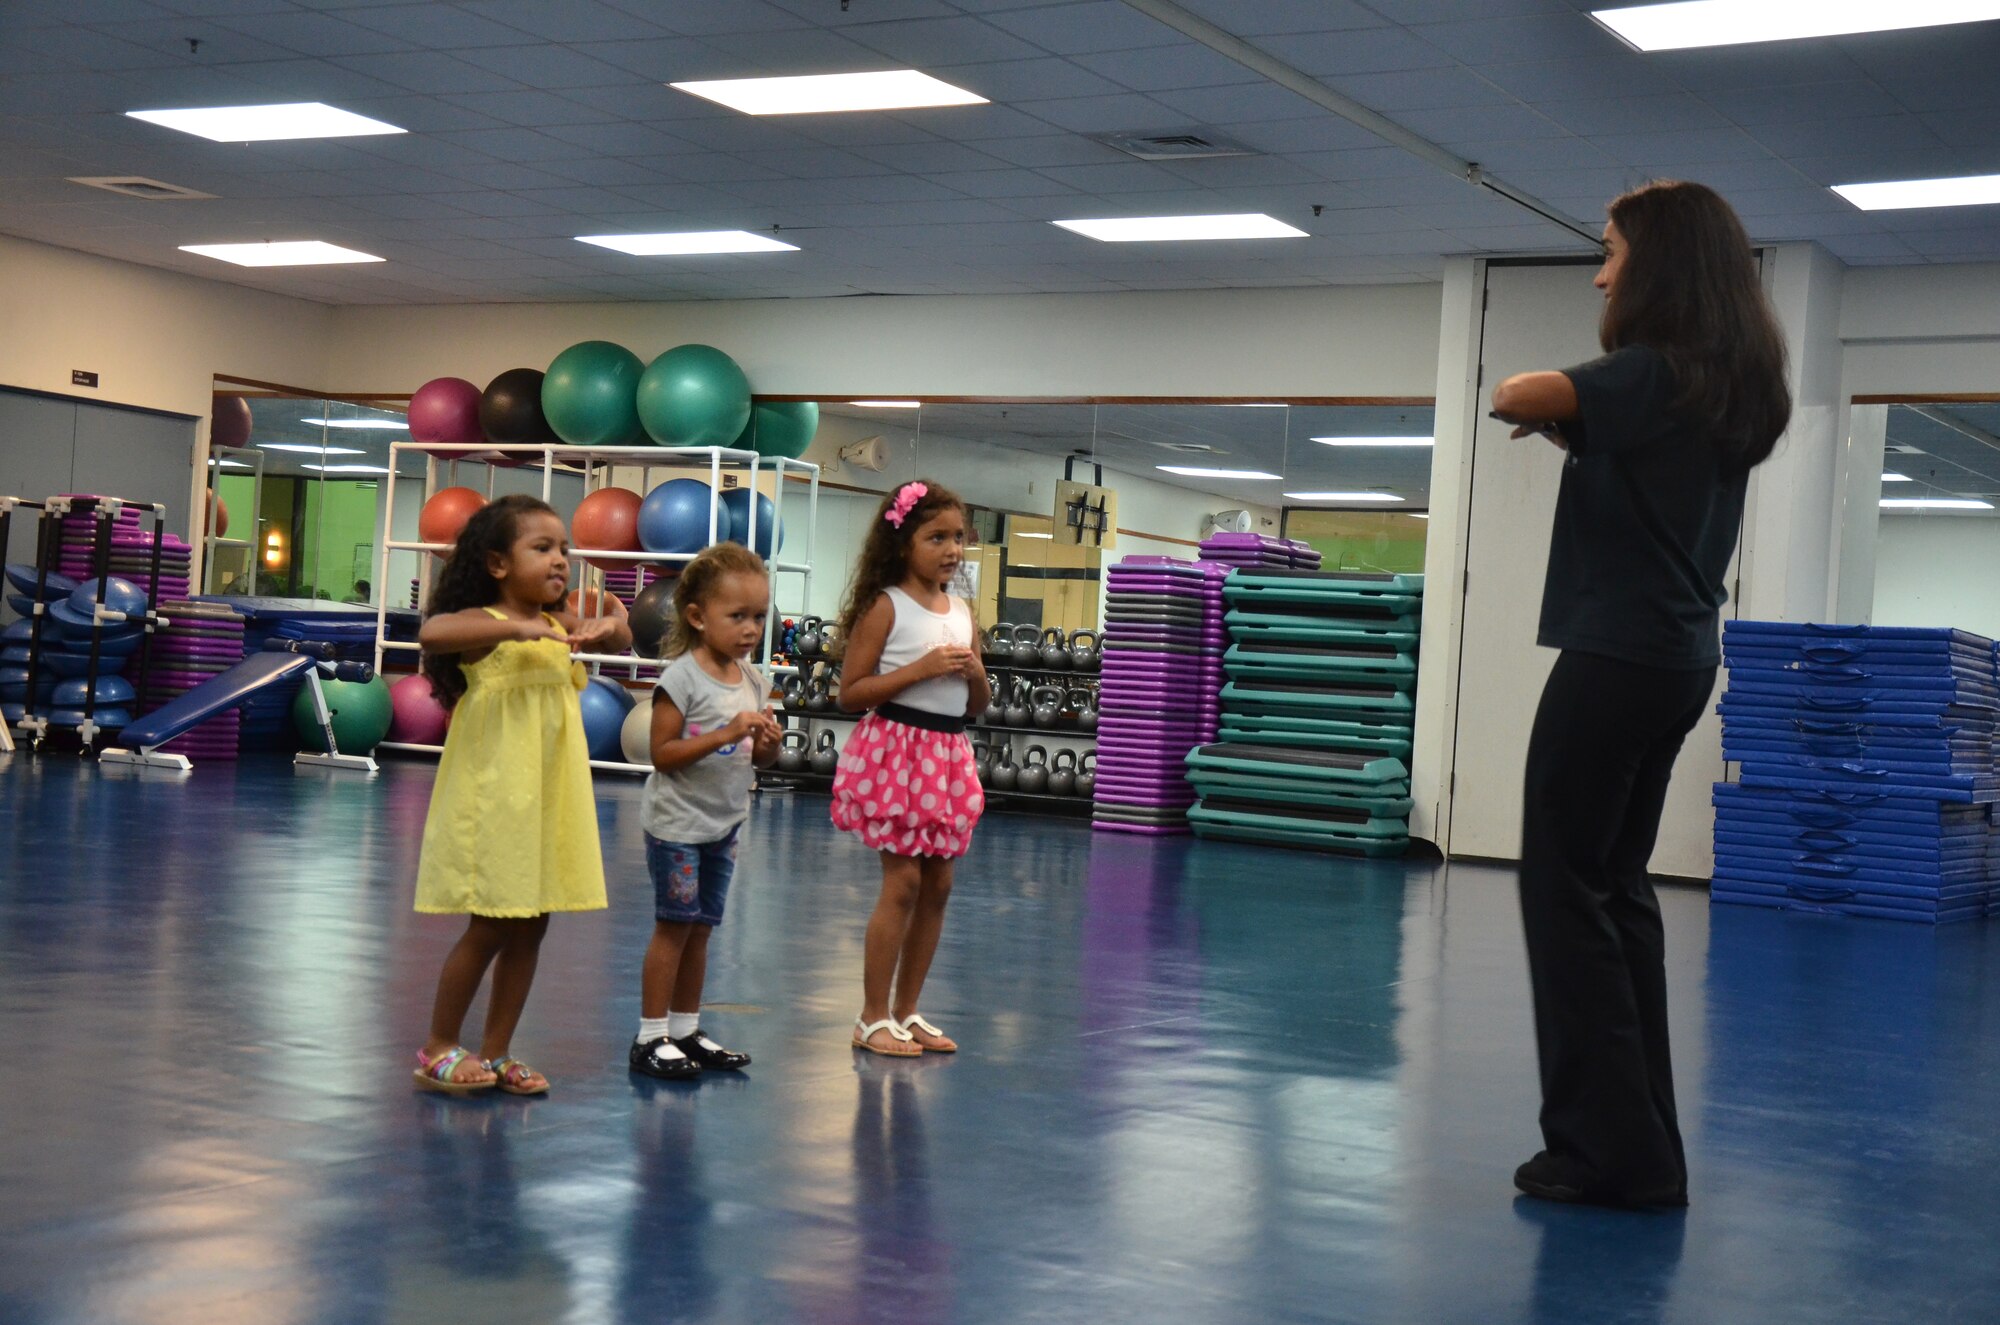 Adriana Bruton, a dance instructor on base, teaches students during a youth ballroom dance class on Andersen Air Force Base, Guam, June 26, 2013. Bruton instructs ages 3 and older and incorporates spelling and social skills into the curriculum. (U.S. Air Force photo by Staff Sgt. Veronica Montes/Released)